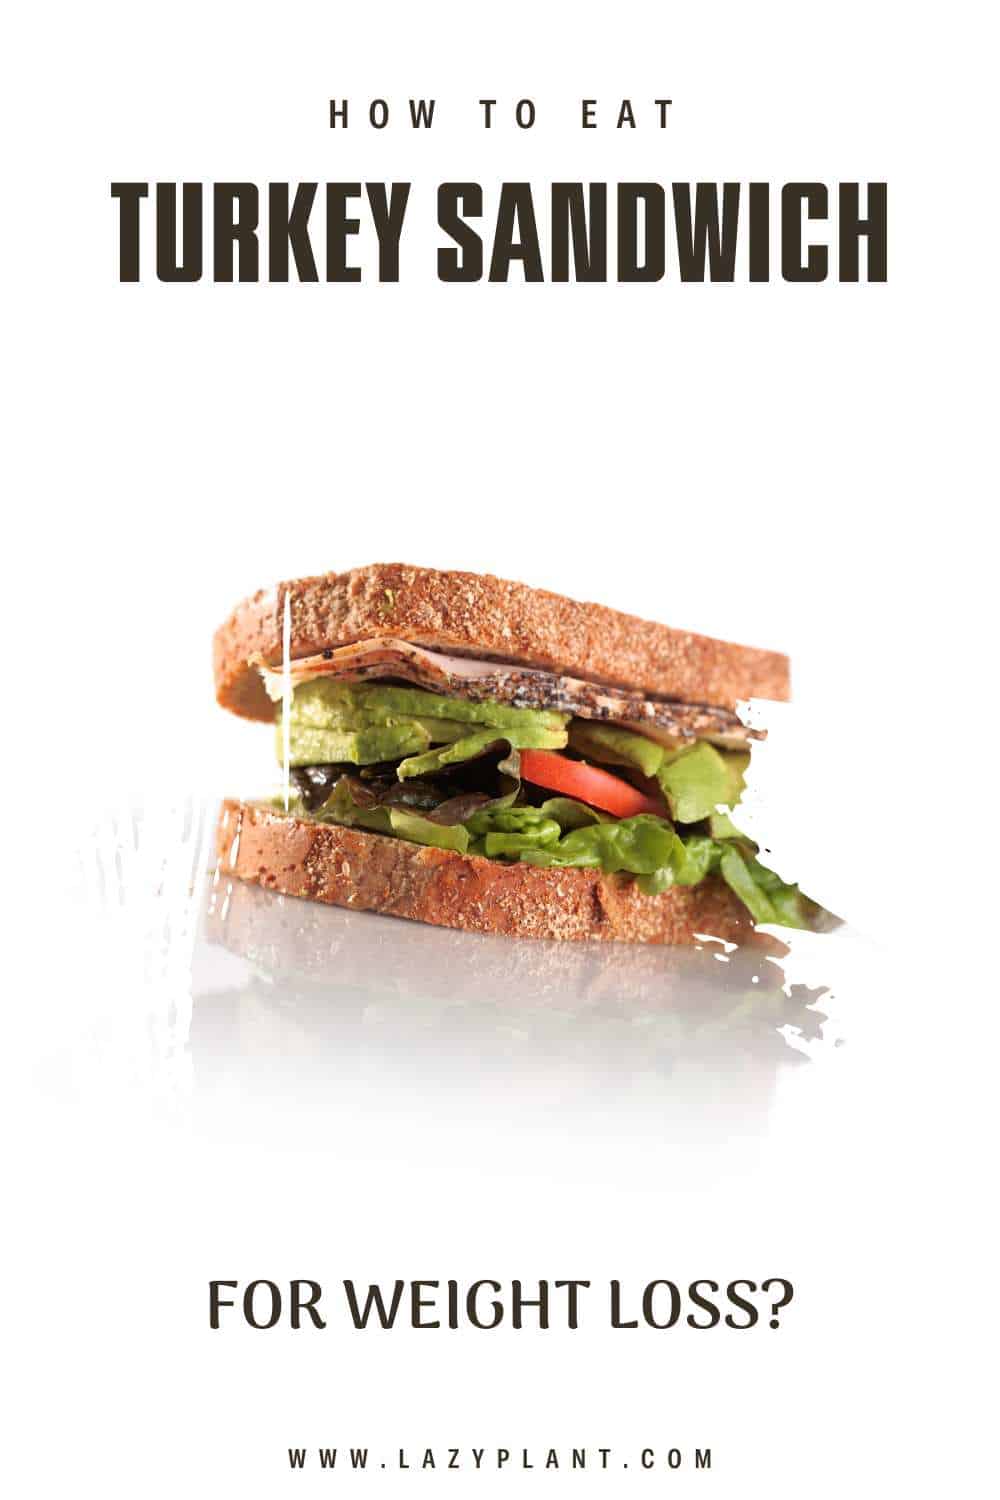 Don't let your love for turkey sandwiches lead to weight gain. Follow these tips to avoid it.